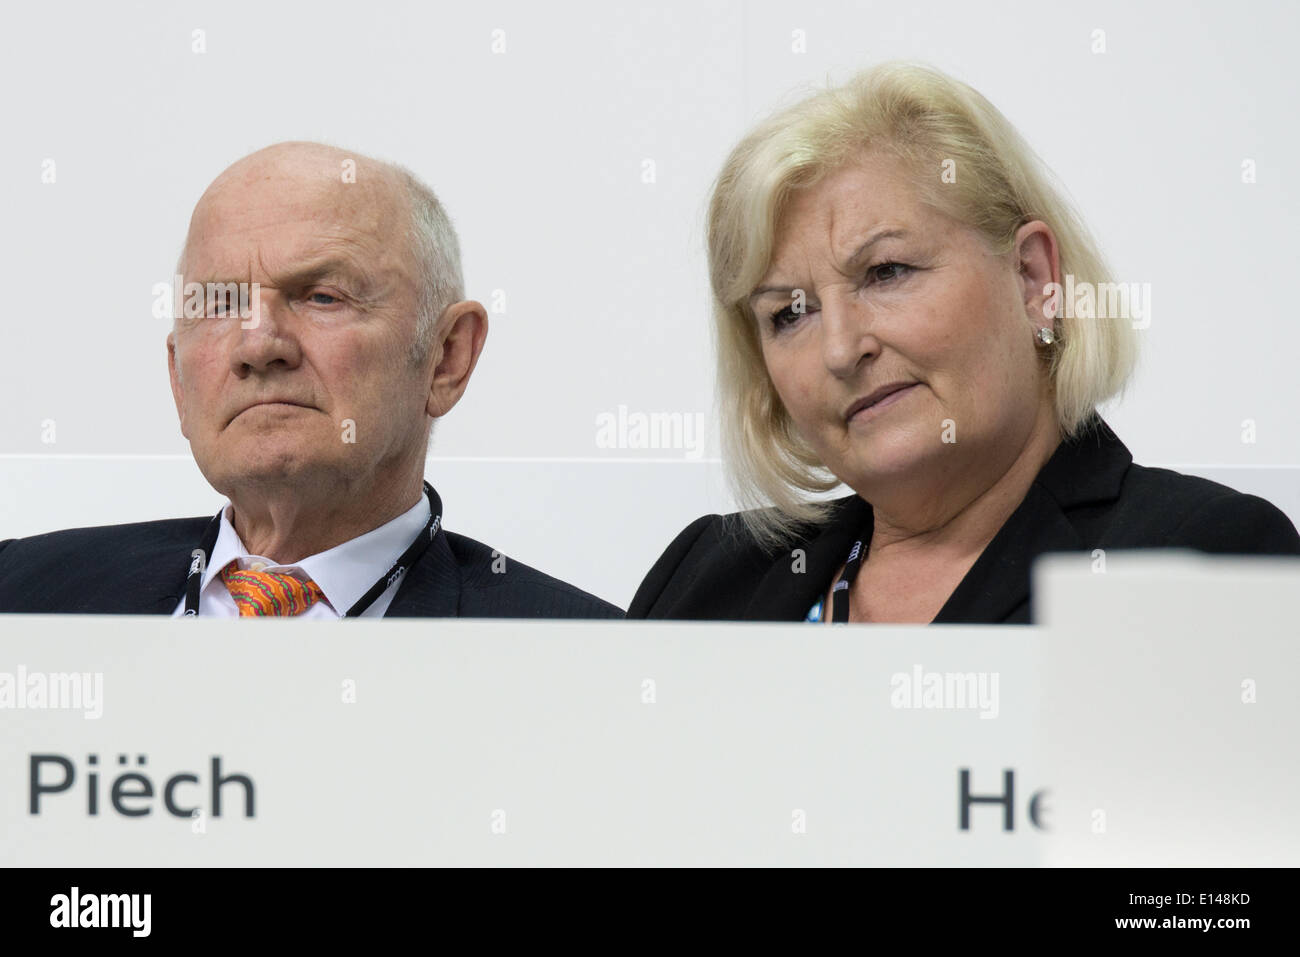 Volkswagen chairman of the supervisory board Ferdinand Piech and his wife Ursula Piech, member of the supervisory board, attend the Audi general meeting in Ingolstadt, Germany, 22 May 2014. Photo: ARMIN WEIGEL/dpa Stock Photo